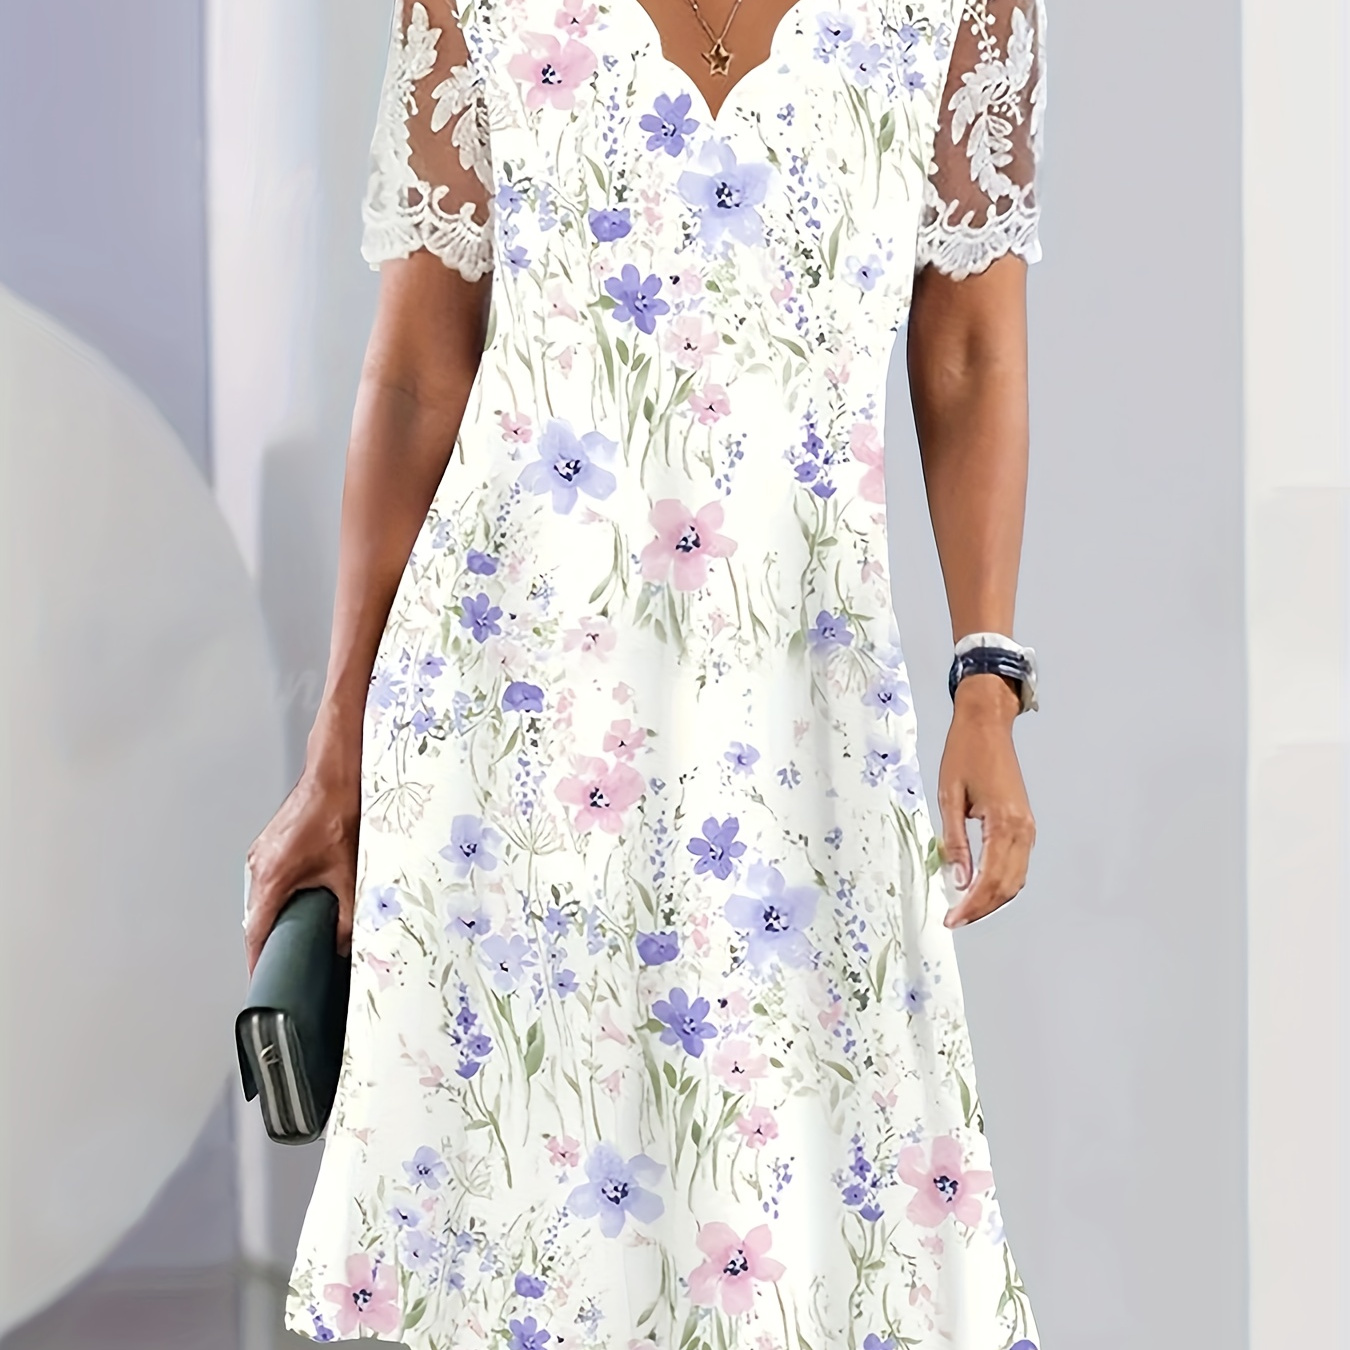 

Floral Print Scallop Trim Dress, Casual Lace Stitching A-line Dress For Spring & Summer, Women's Clothing